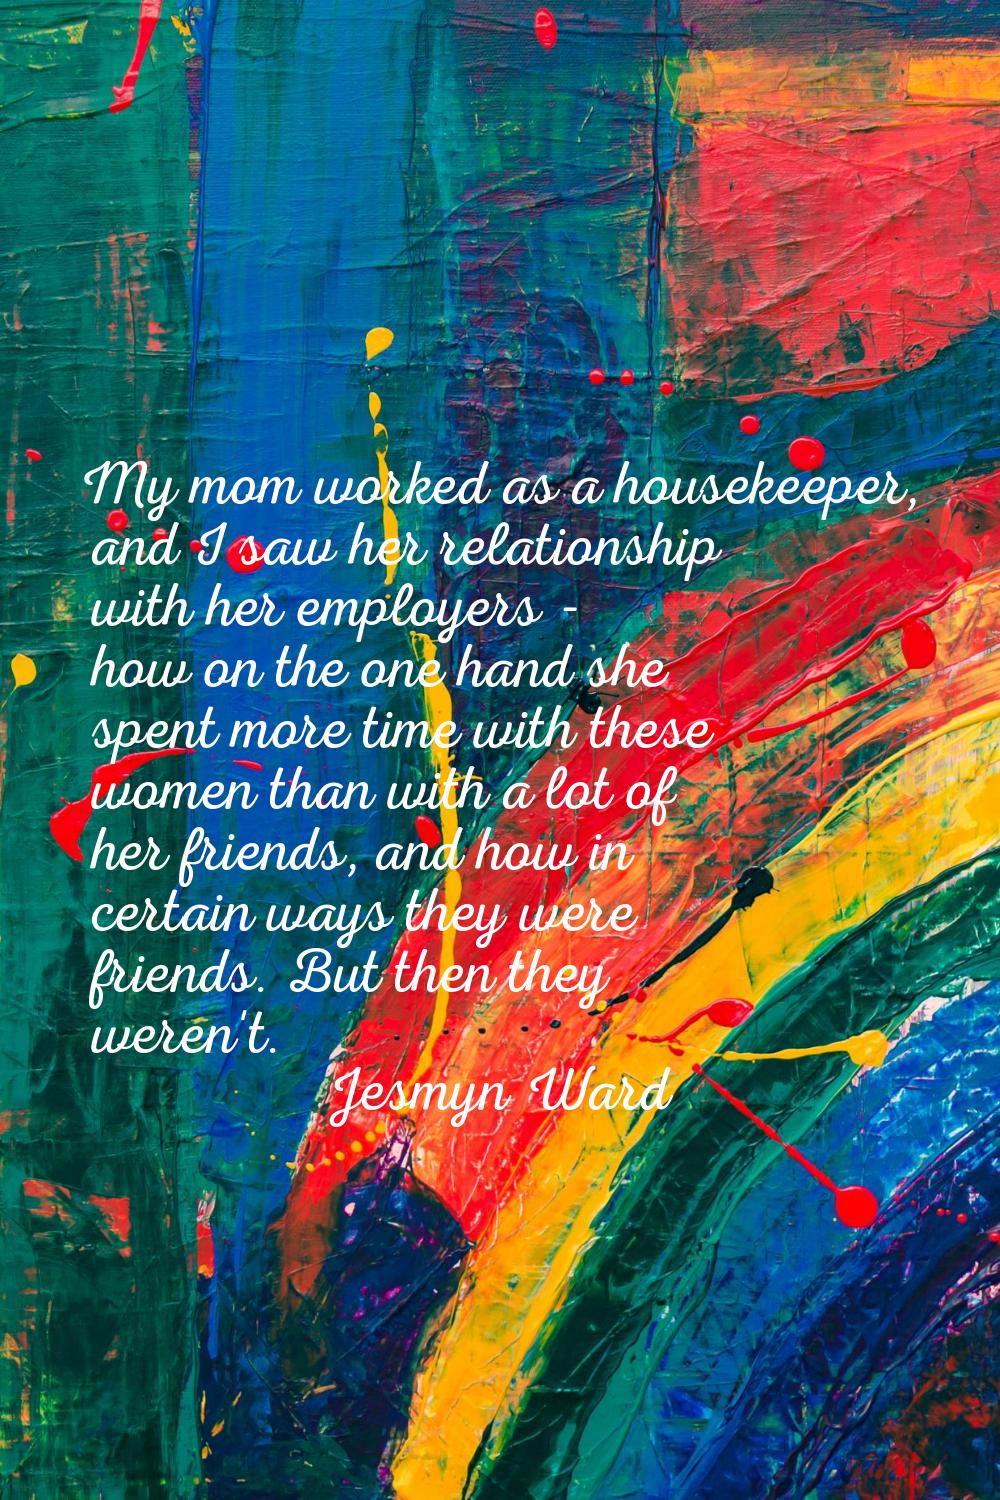 My mom worked as a housekeeper, and I saw her relationship with her employers - how on the one hand